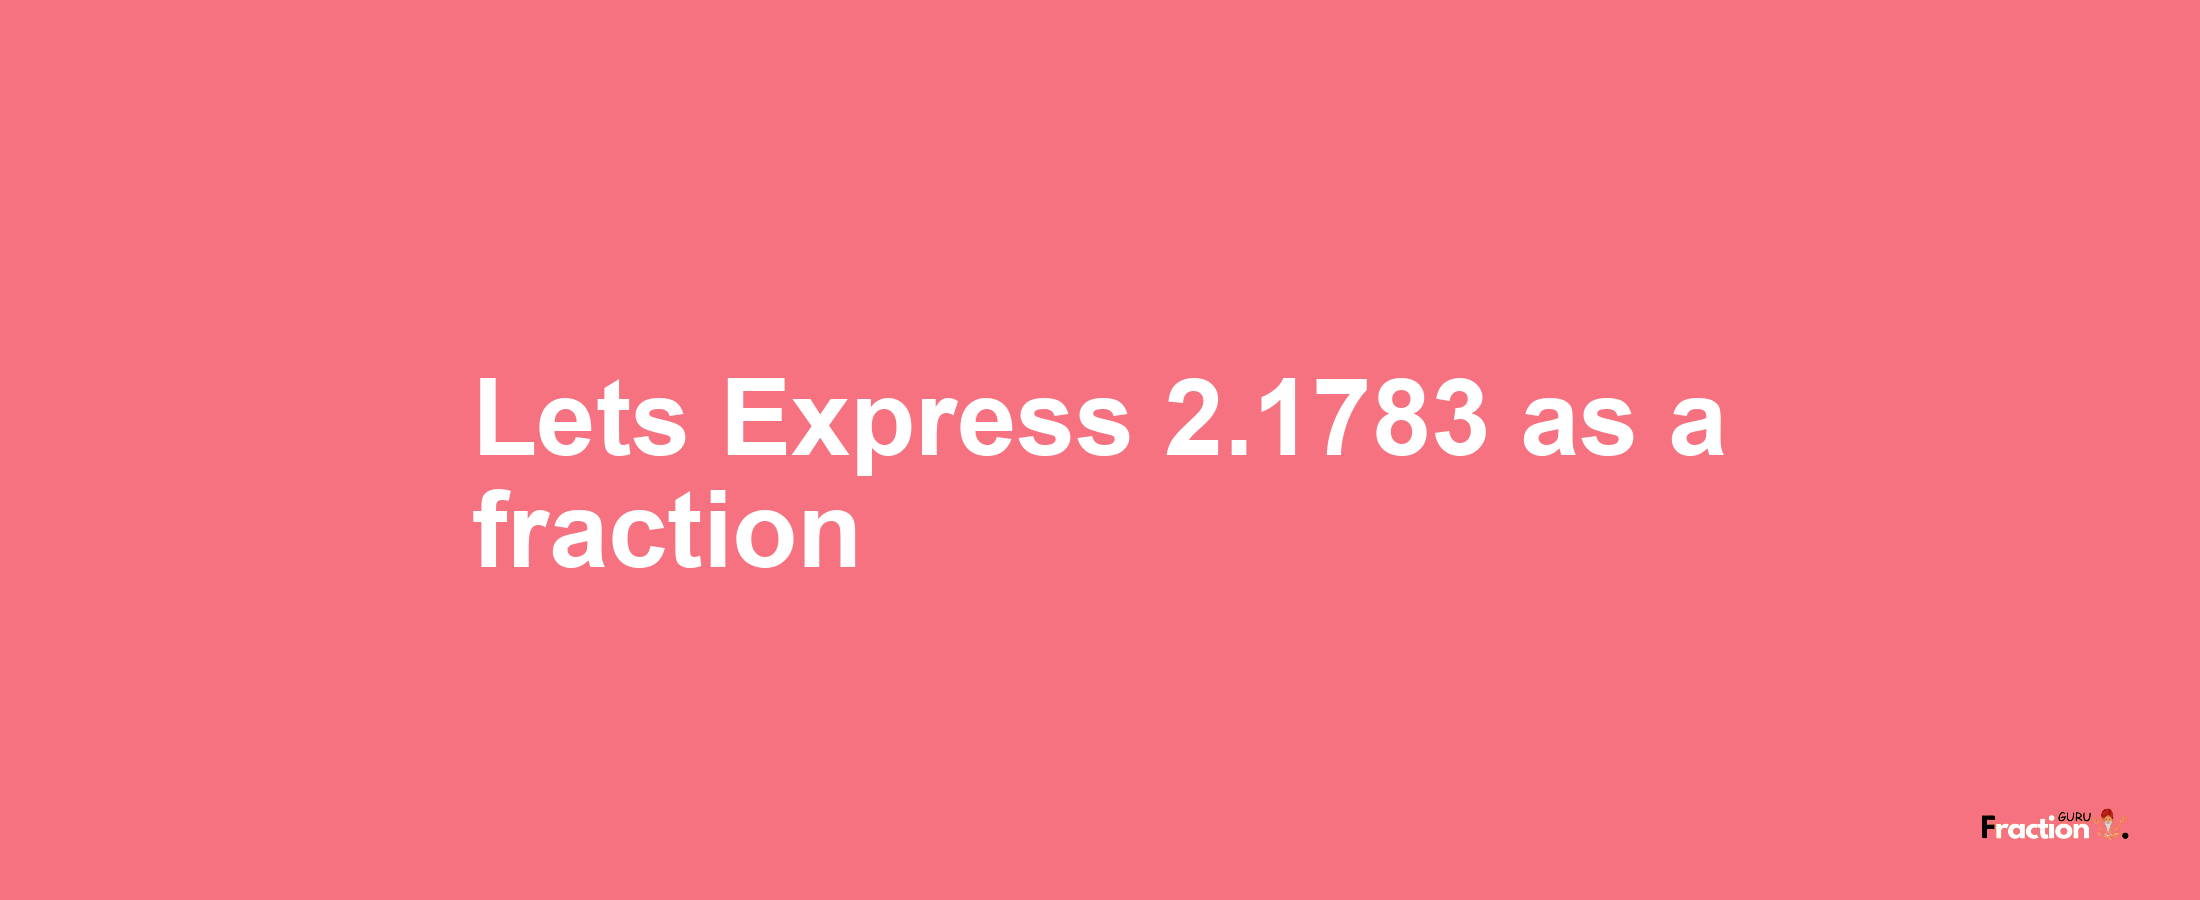 Lets Express 2.1783 as afraction